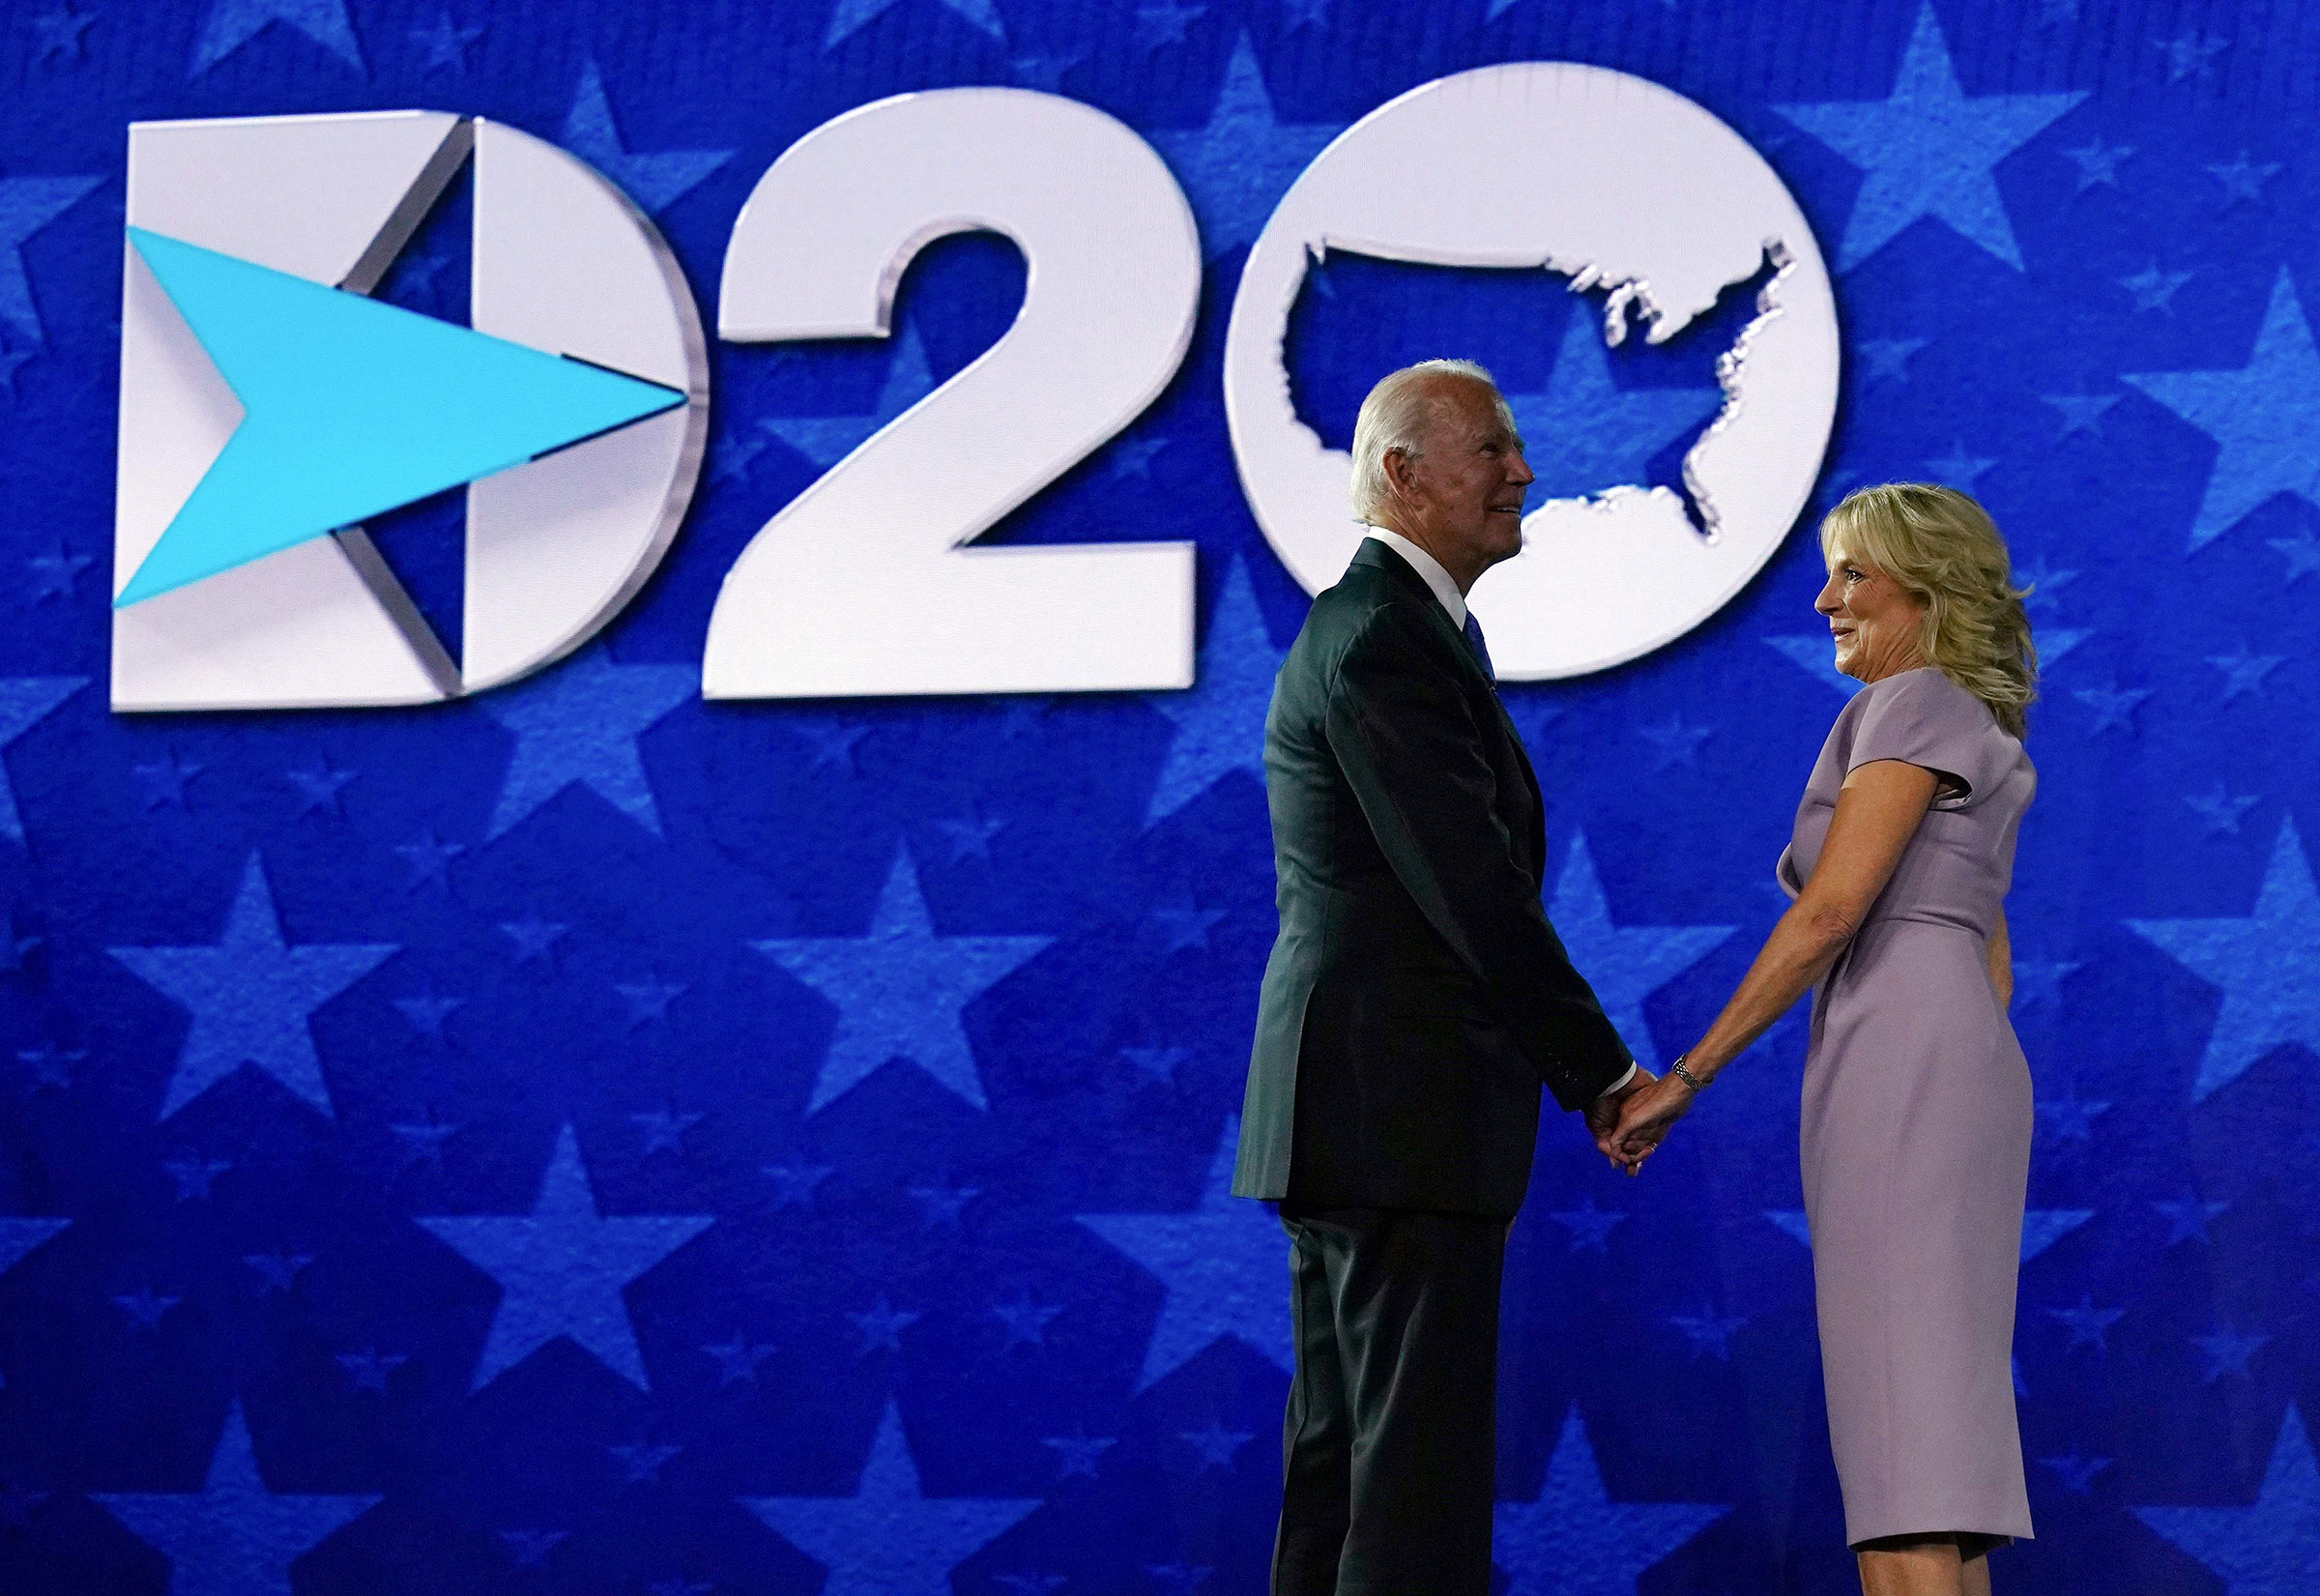 Former vice-president and Democratic presidential nominee Joe Biden and his wife Jill Biden stand on stage after he accepted the Democratic Party nomination for US president during the last day of the Democratic National Convention, being held virtually amid the novel coronavirus pandemic, at the Chase Center in Wilmington, Delaware on Aug. 20, 2020. (Olivier Douliery—AFP/Getty Images)